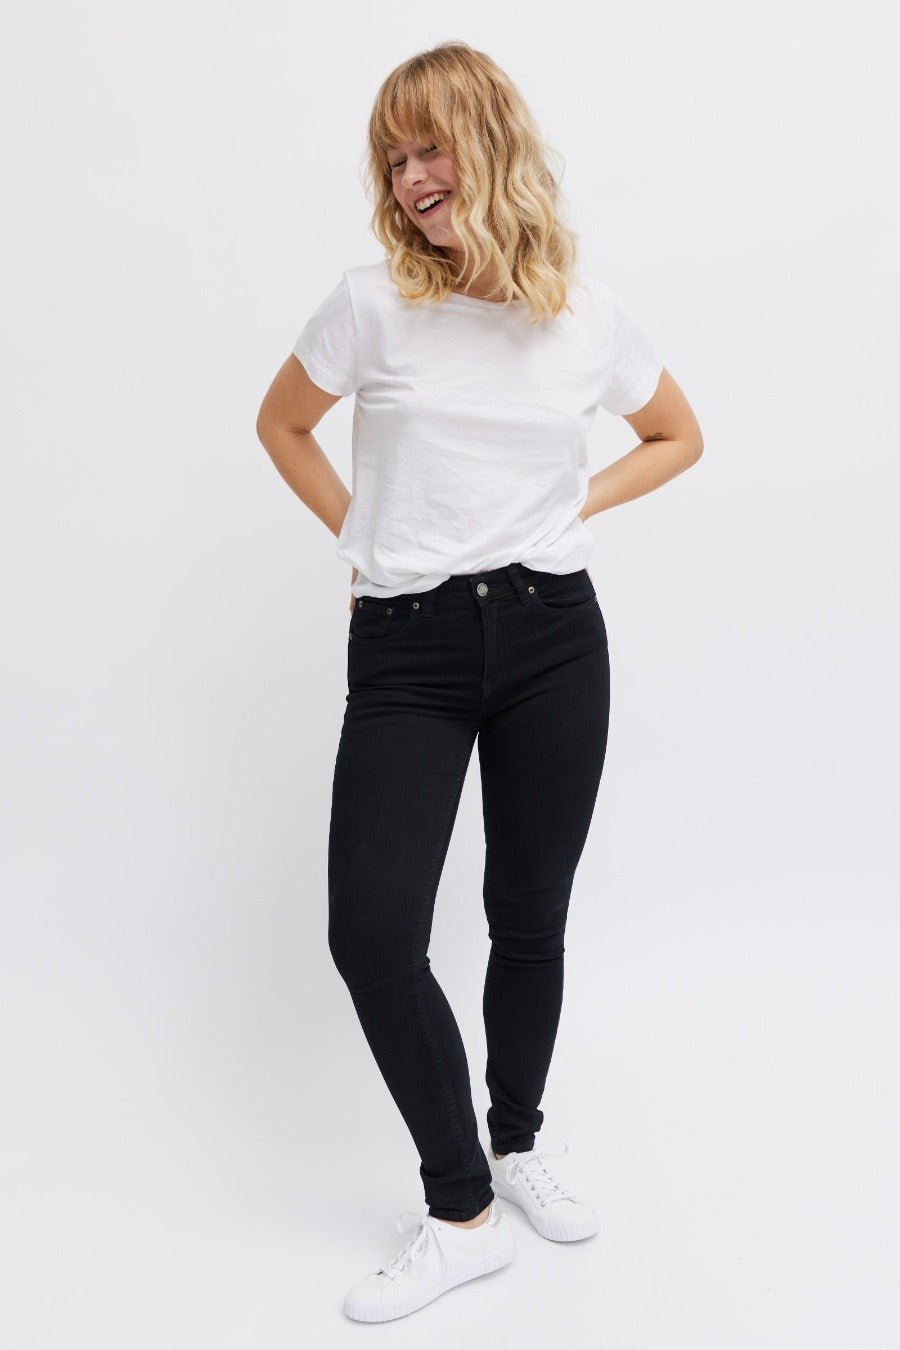 Nordic Swan Ecolabel black denim jeans - GOTS certified cotton and recycled fibers